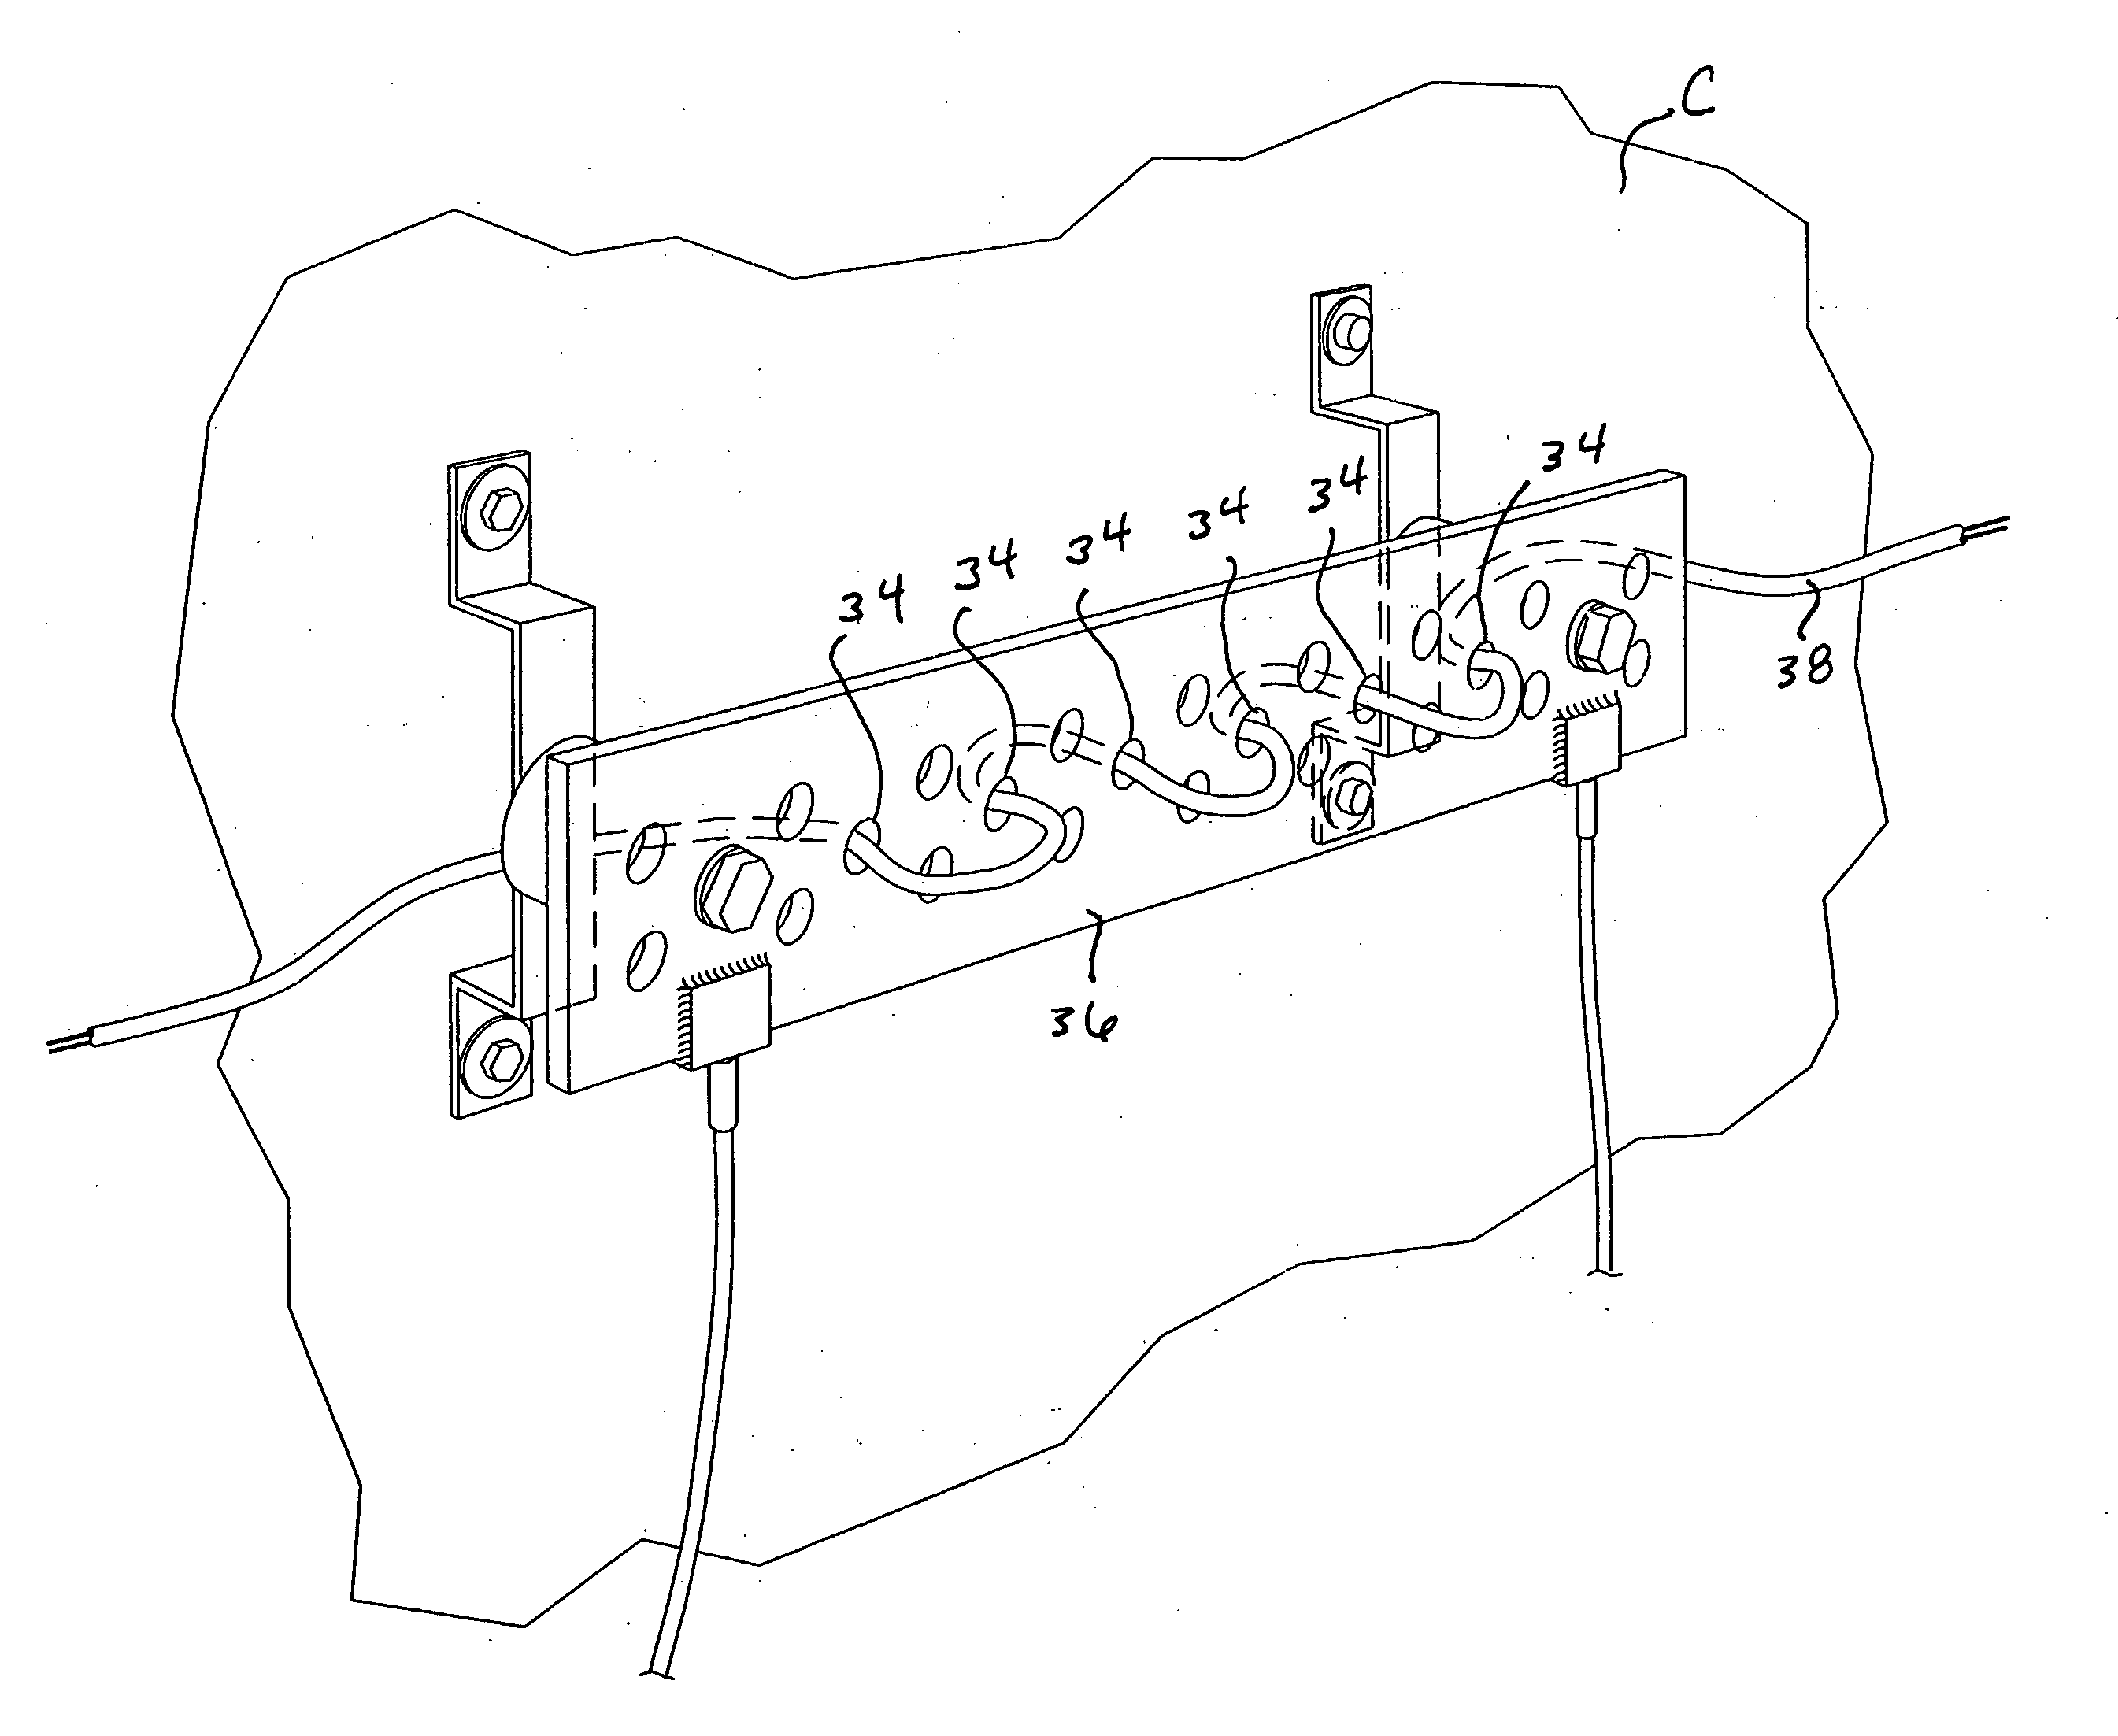 Apparatus and method for monitoring a component of a wireless communication network to determine whether the component has been tampered with, disabled and/or removed